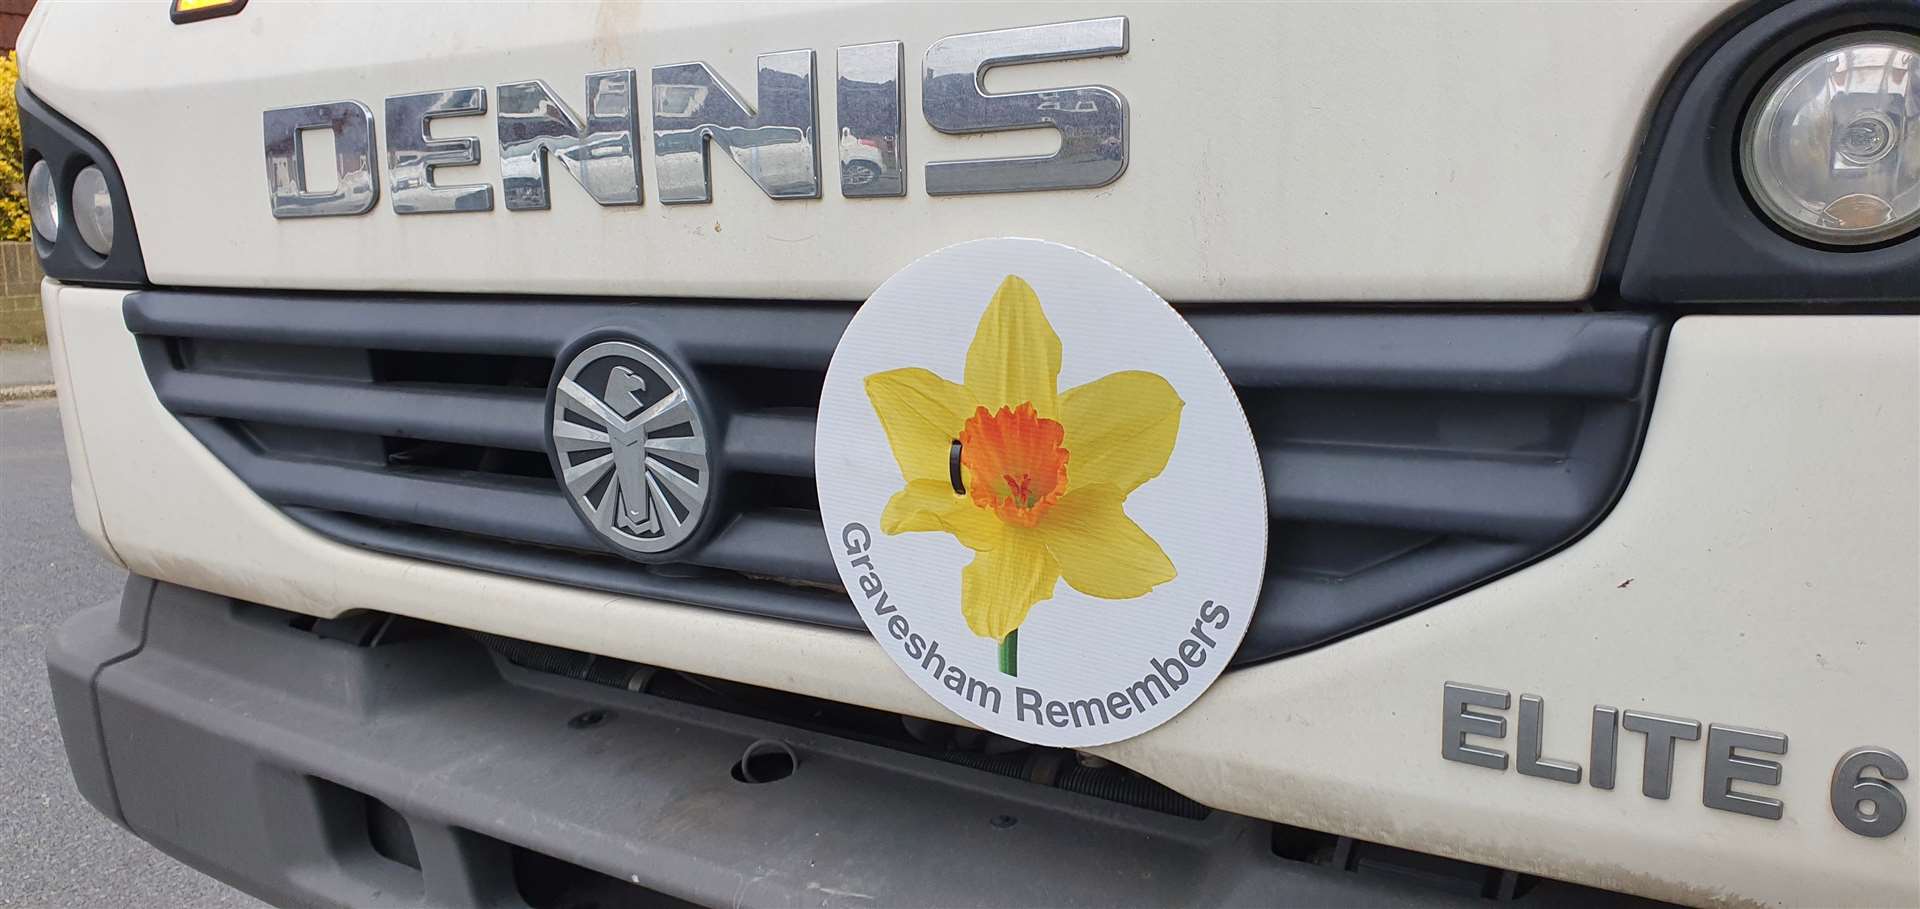 Refuse and council vehicles also had a daffodil placed on their grill this week